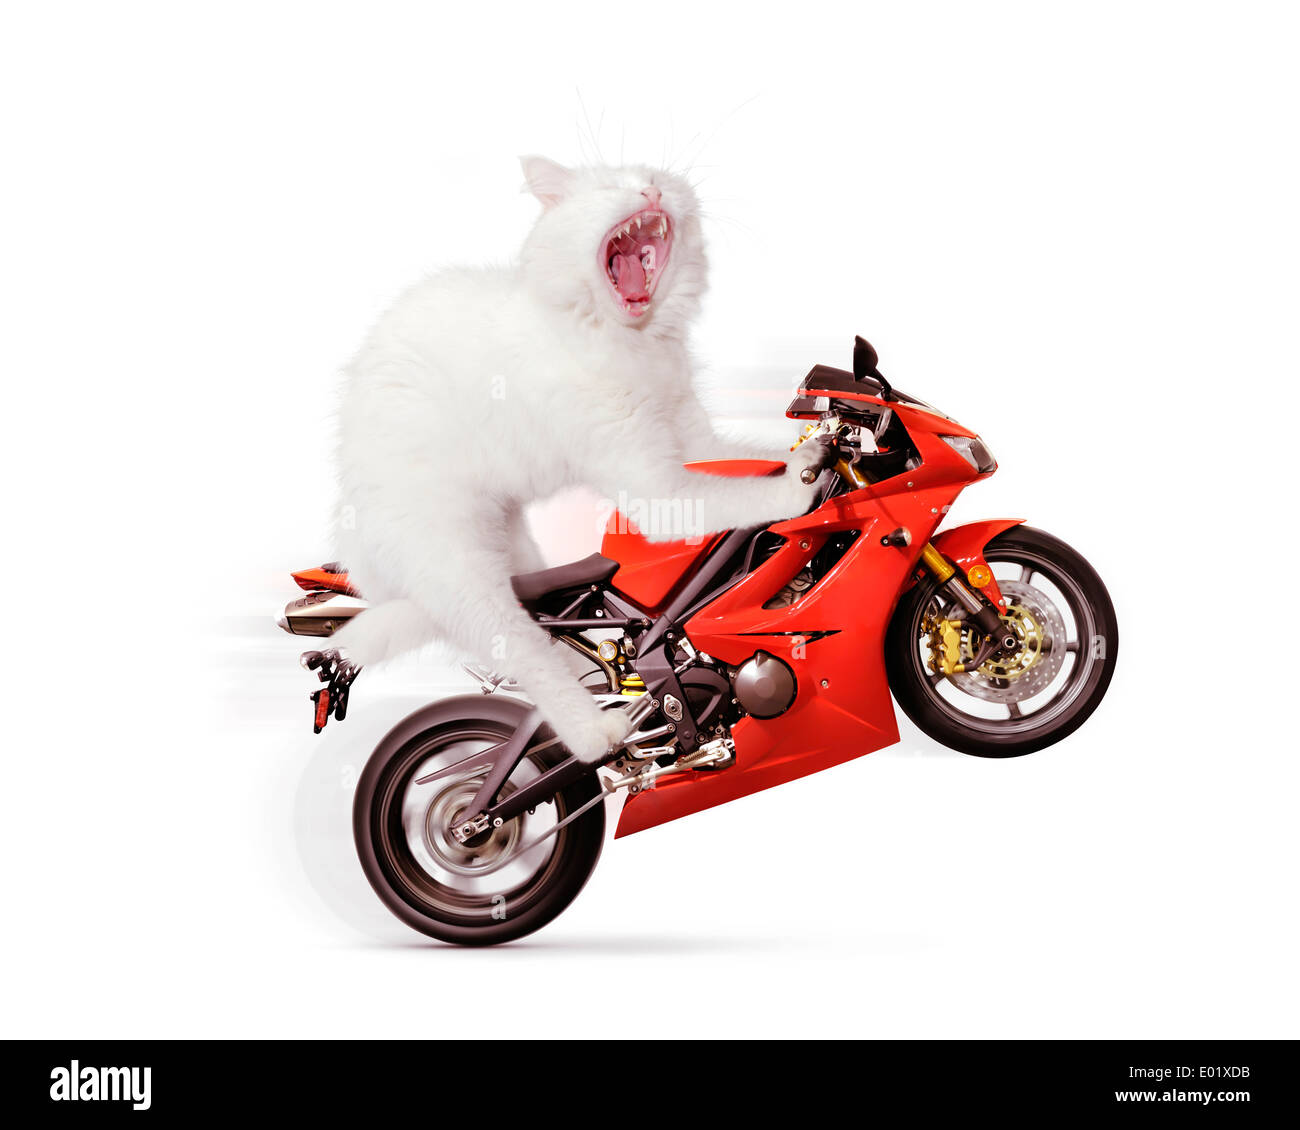 License available at MaximImages.com - Humorous concept of a white cat doing a wheelie on a red sports motorcycle, isolated on white background Stock Photo